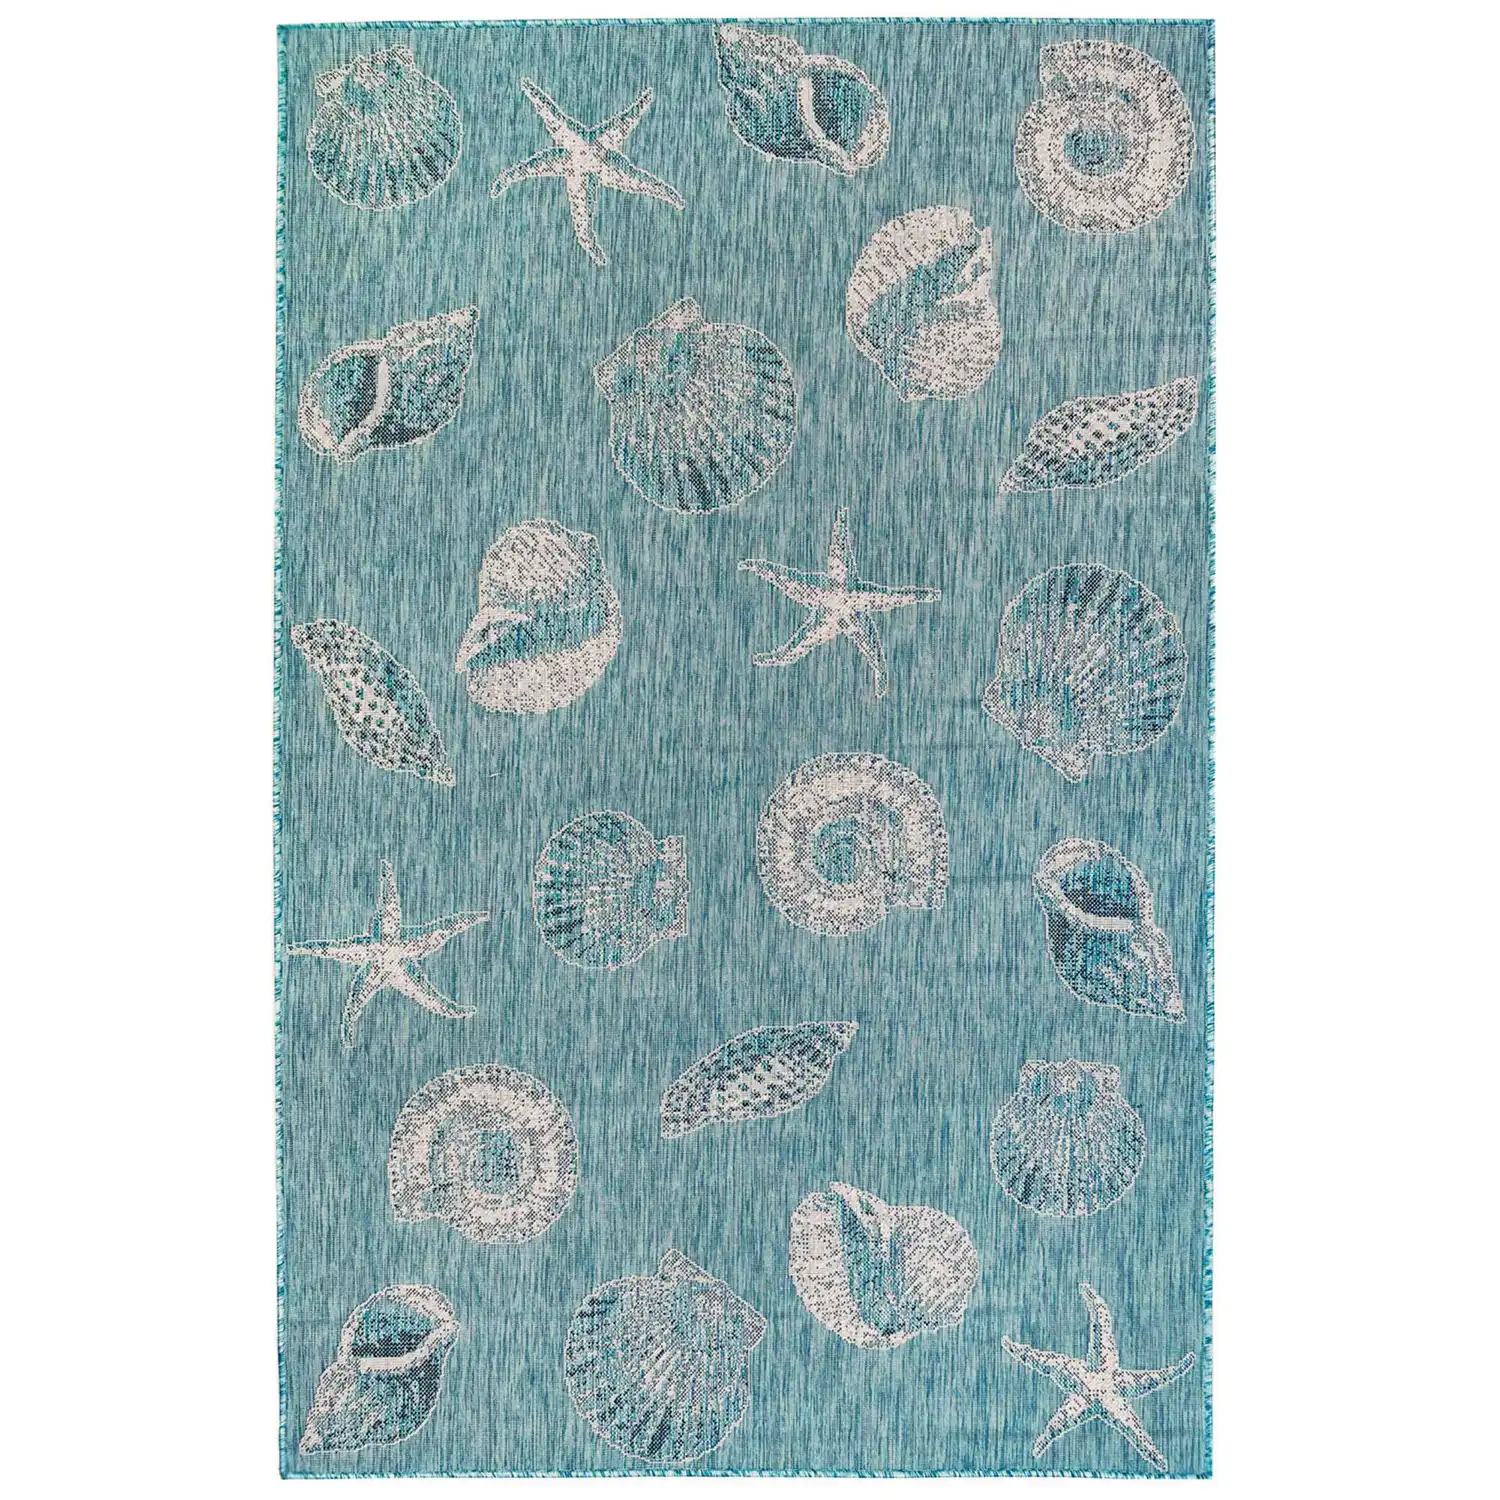 Liora Manne Carmel Low Profile  Easy Care Indoor/Outdoor Woven Rug- Shells Aqua  Product Image